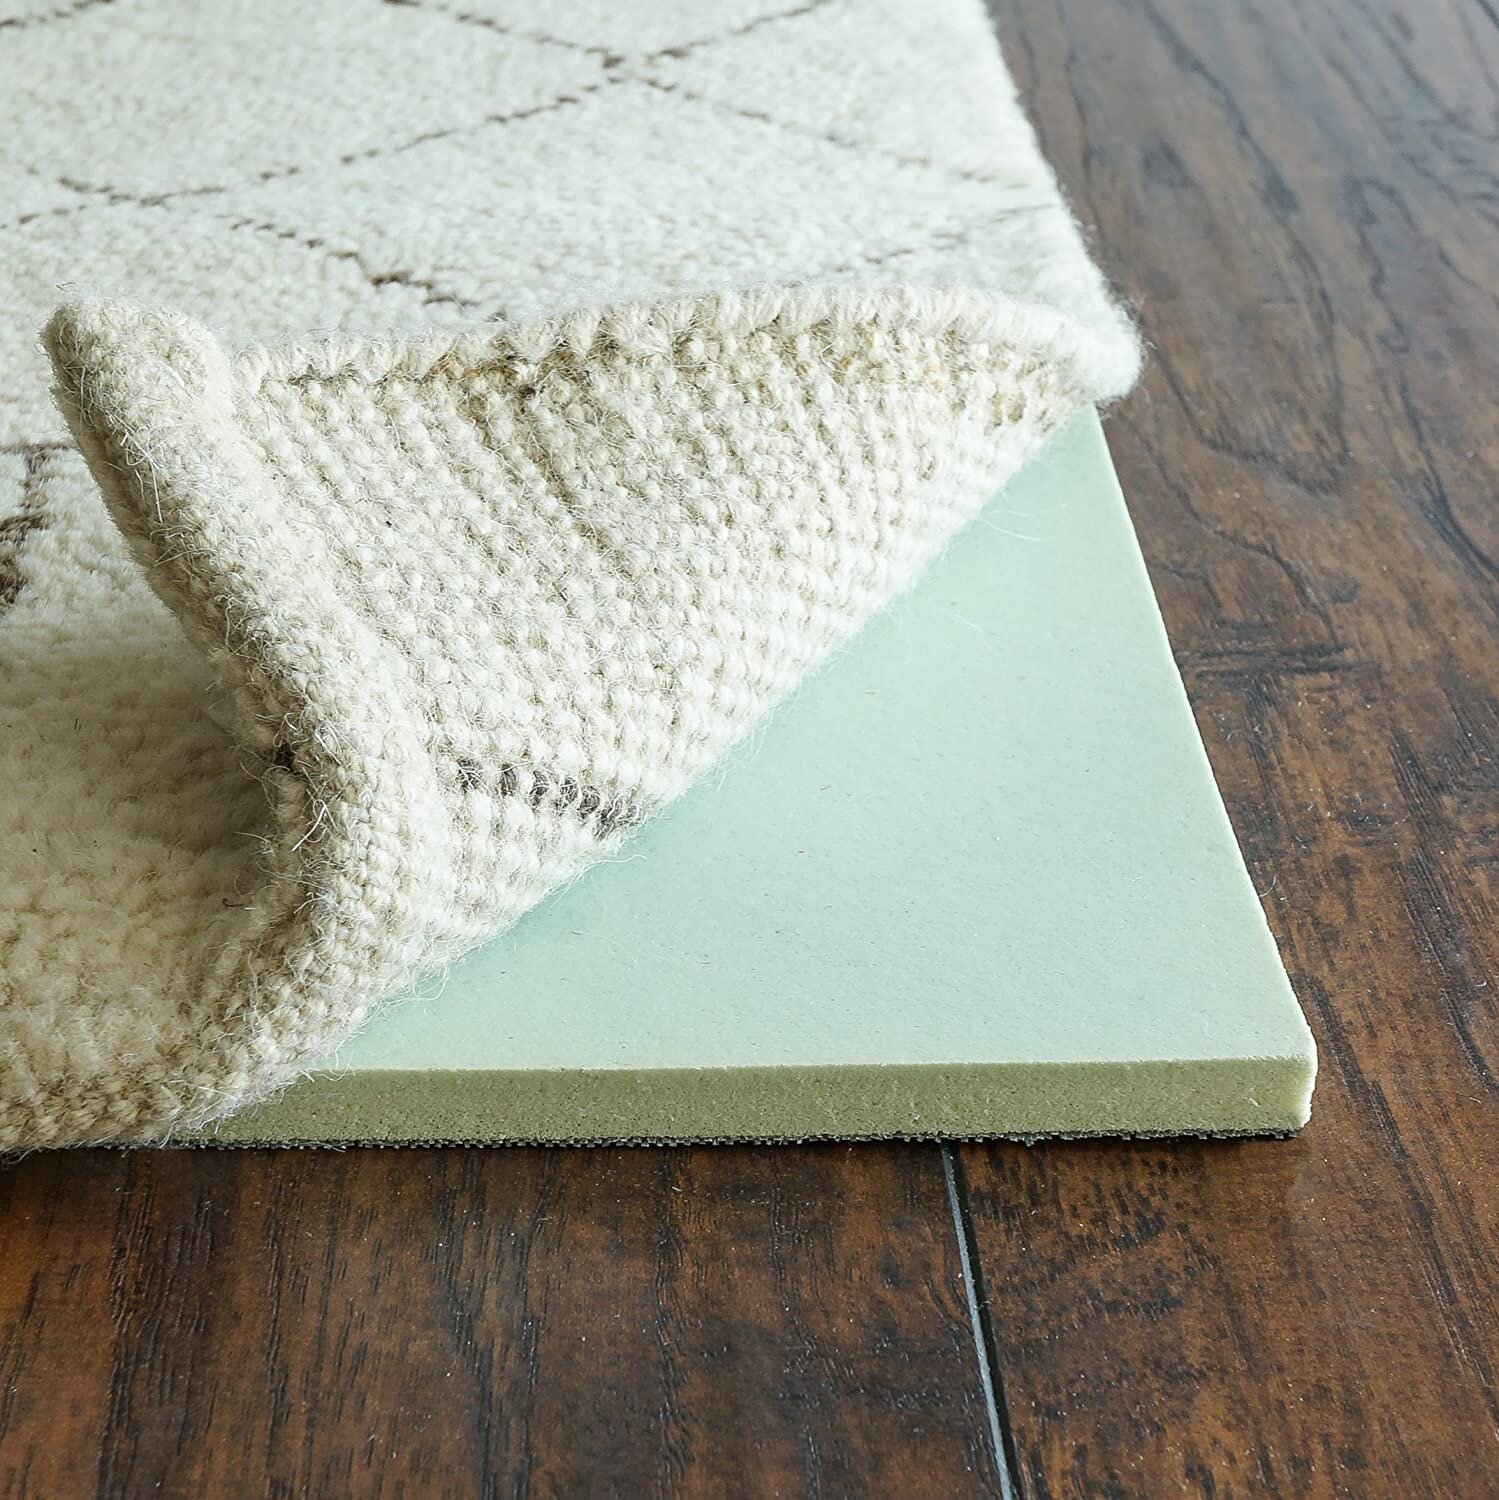 Rug Pad Recommendations Nadine Stay, What Kind Of Rug Pads Are Safe For Hardwood Floors